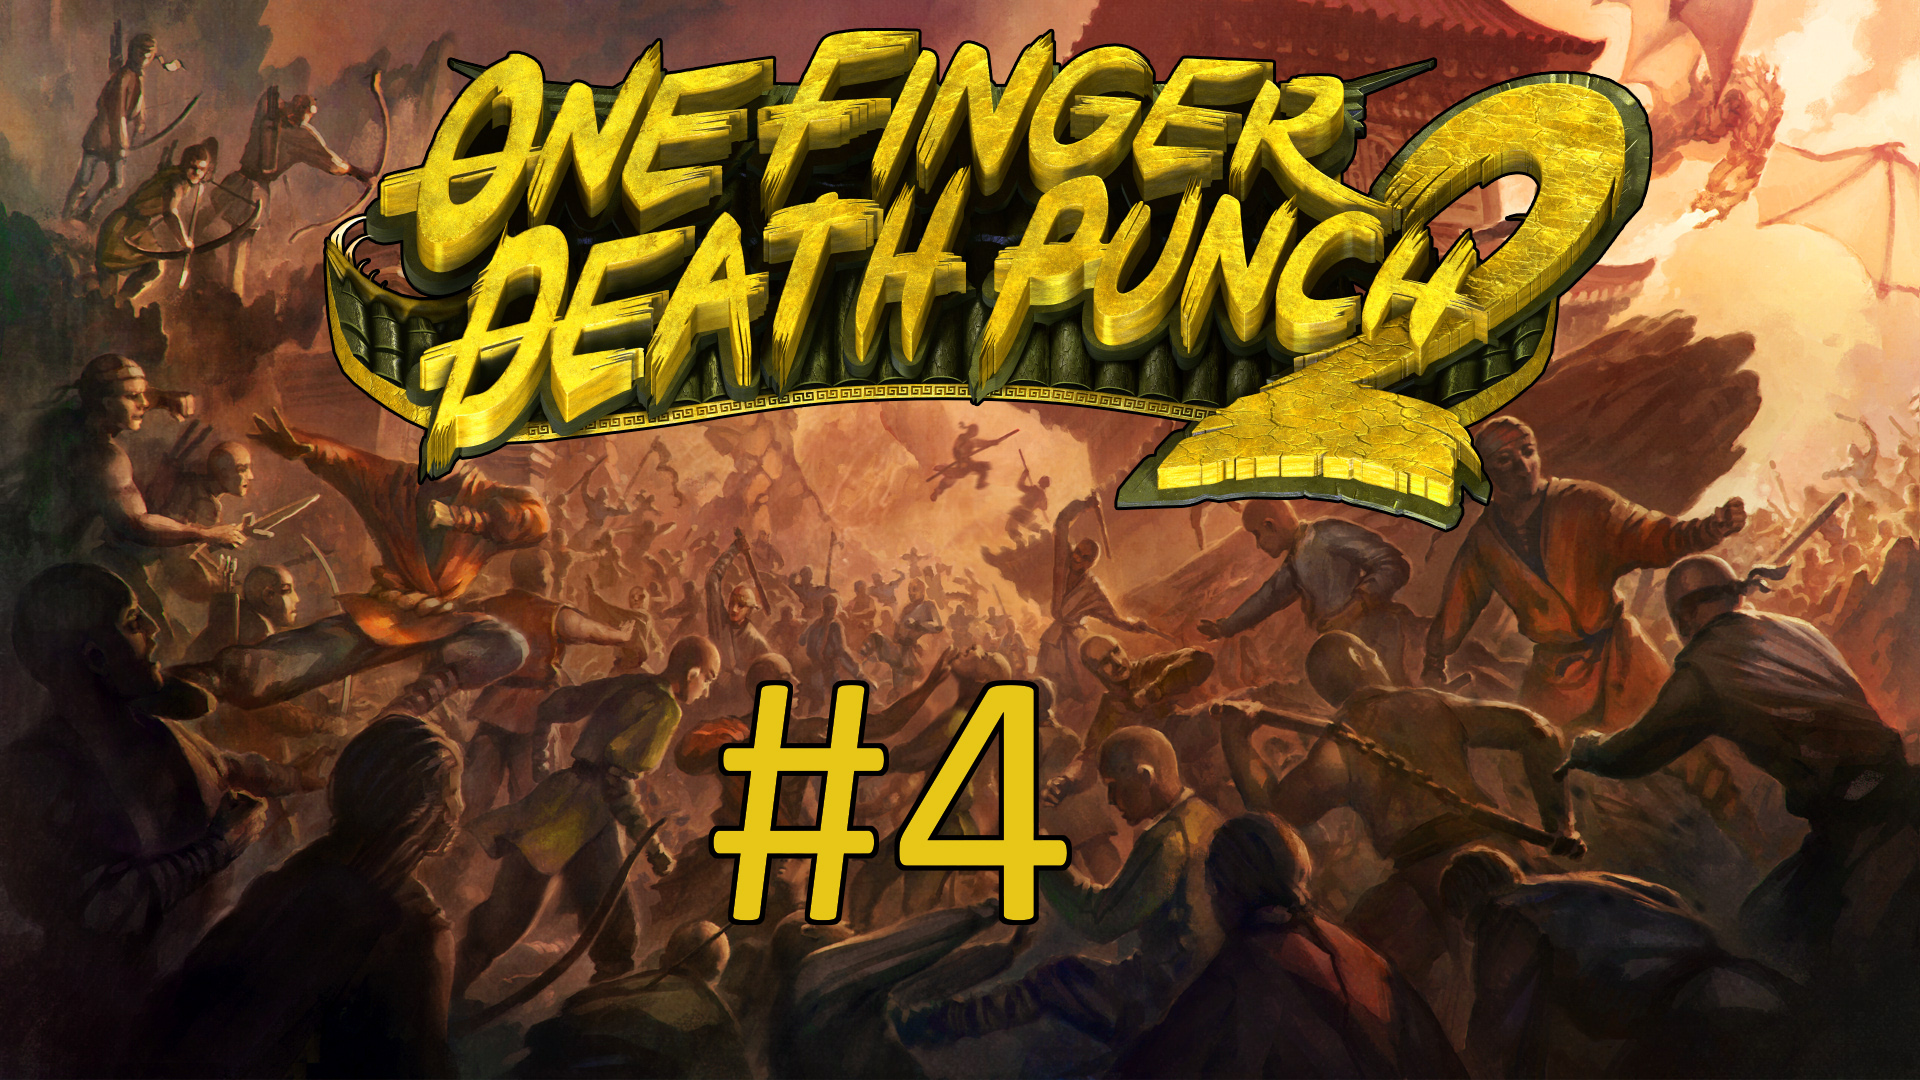 One finger death punch steam фото 68